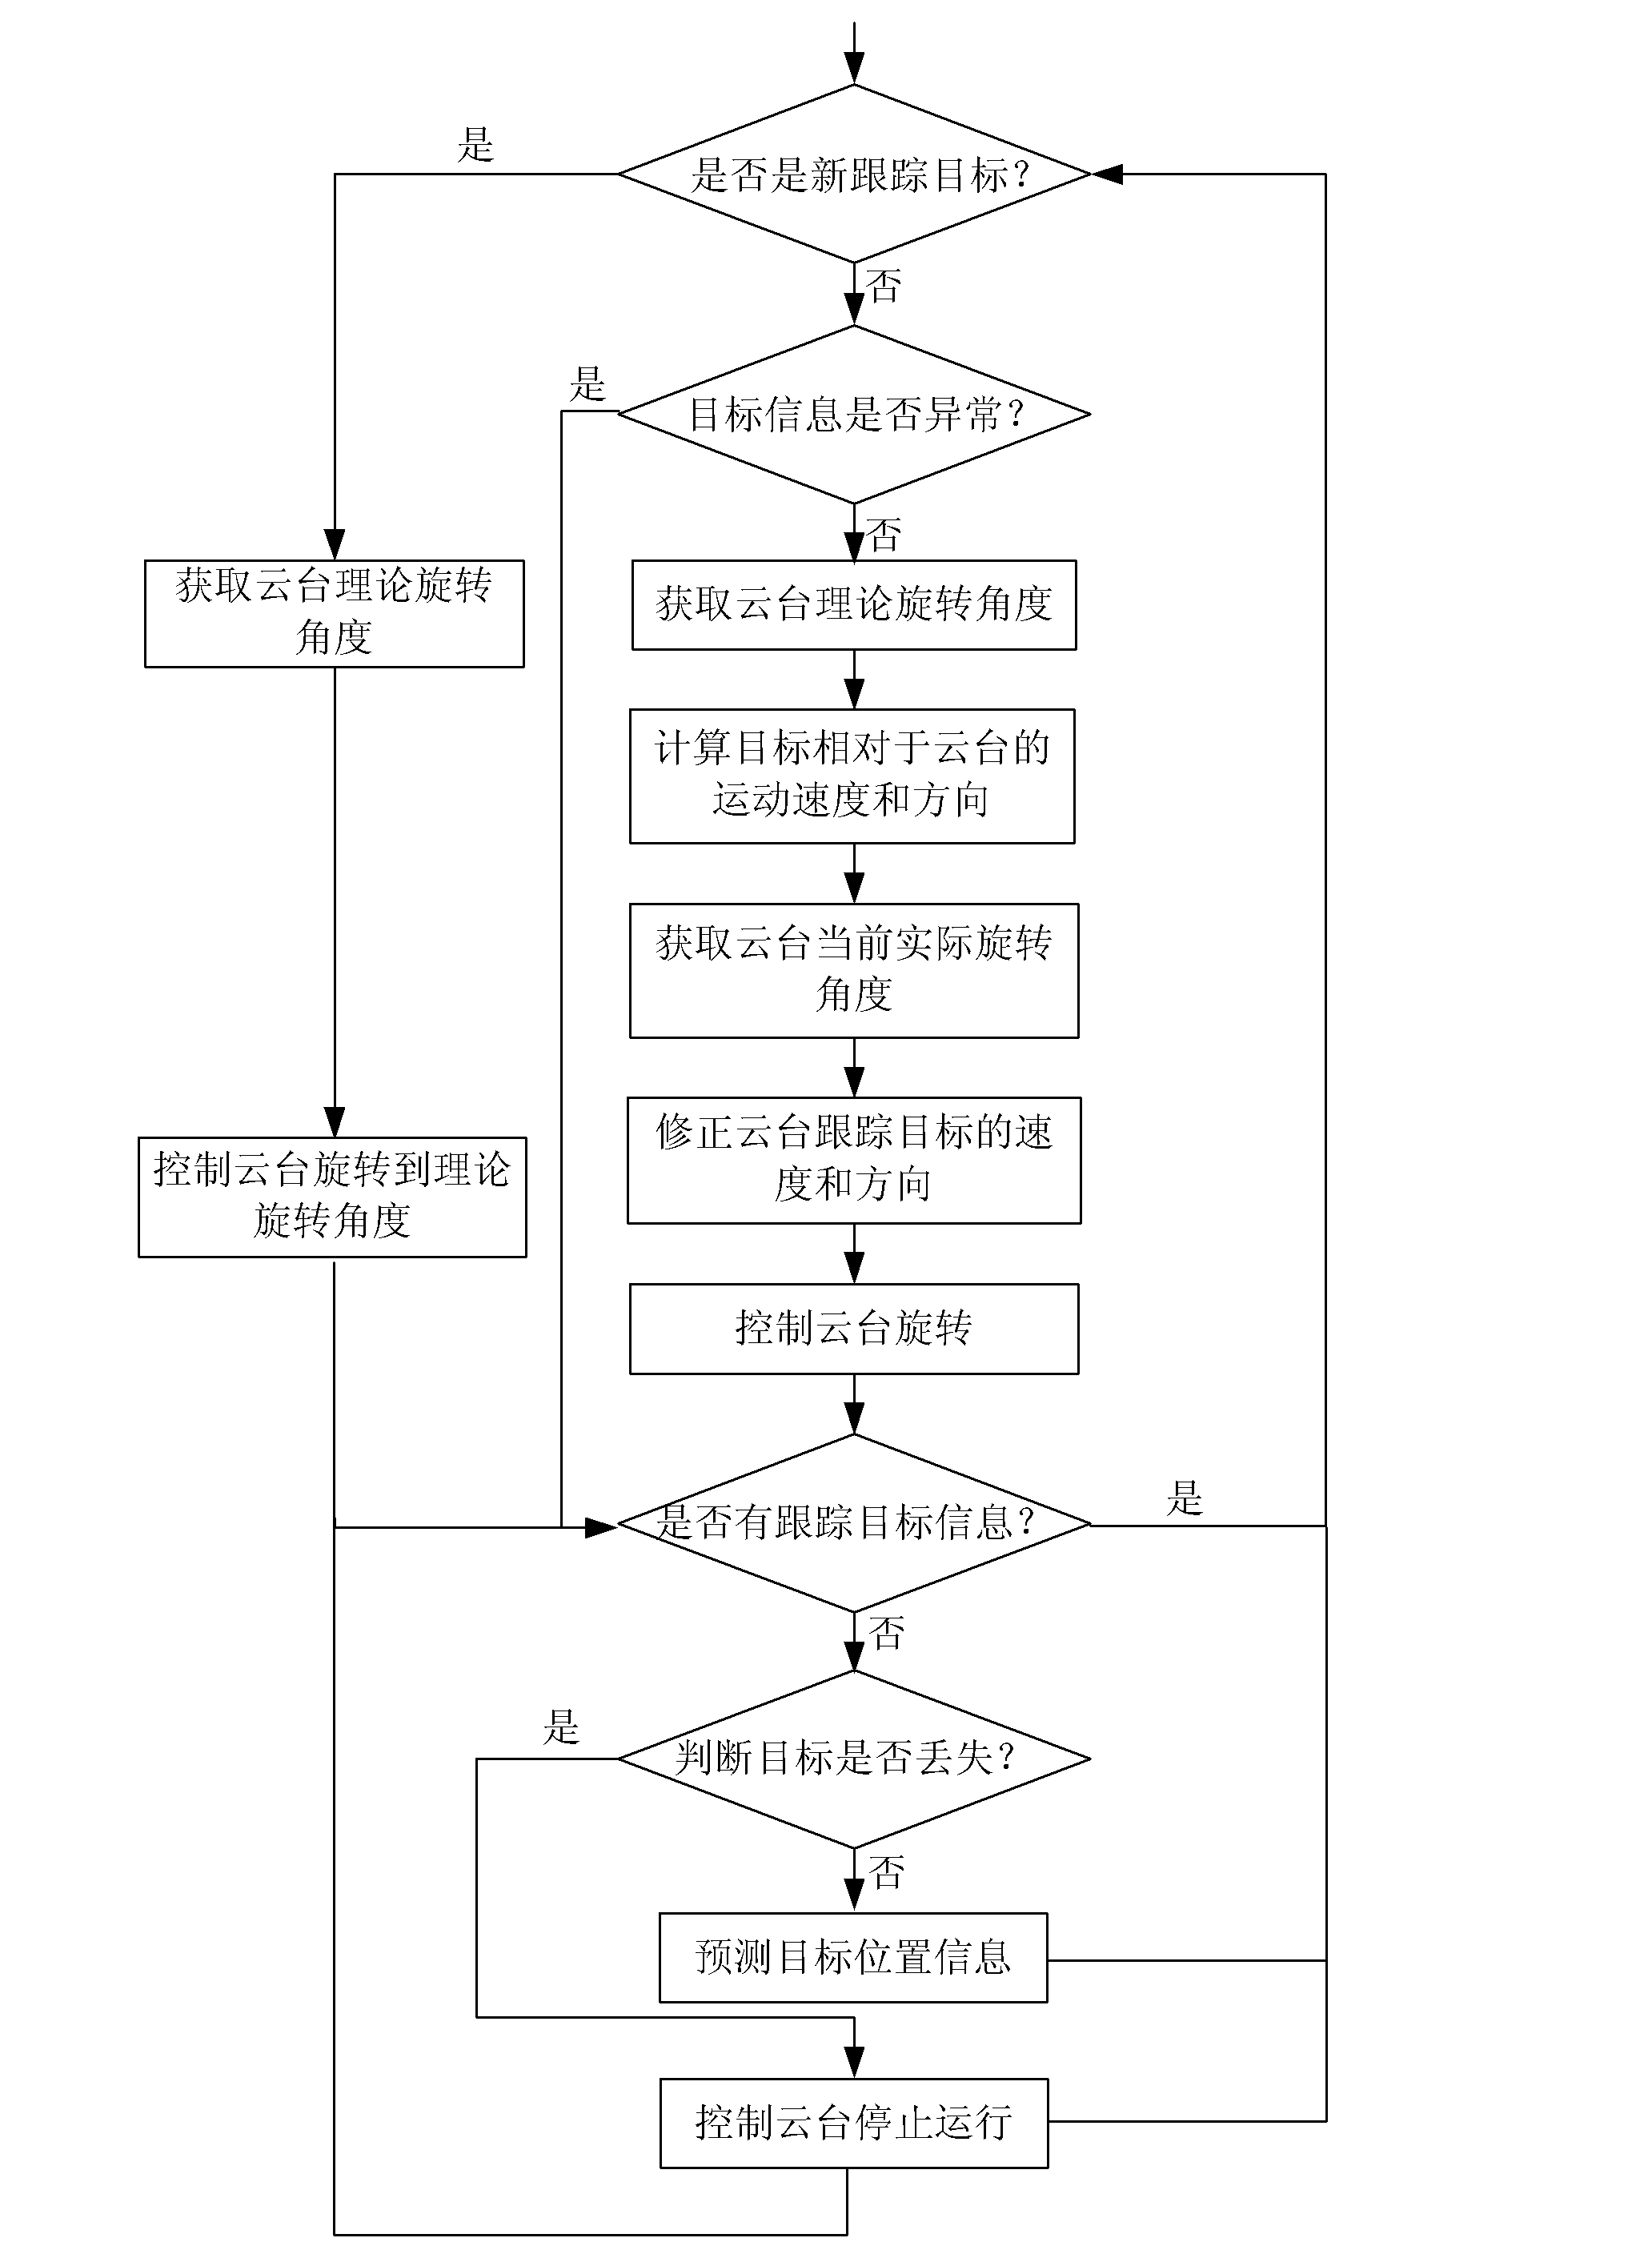 Method for automatically and smoothly tracking target by cradle head